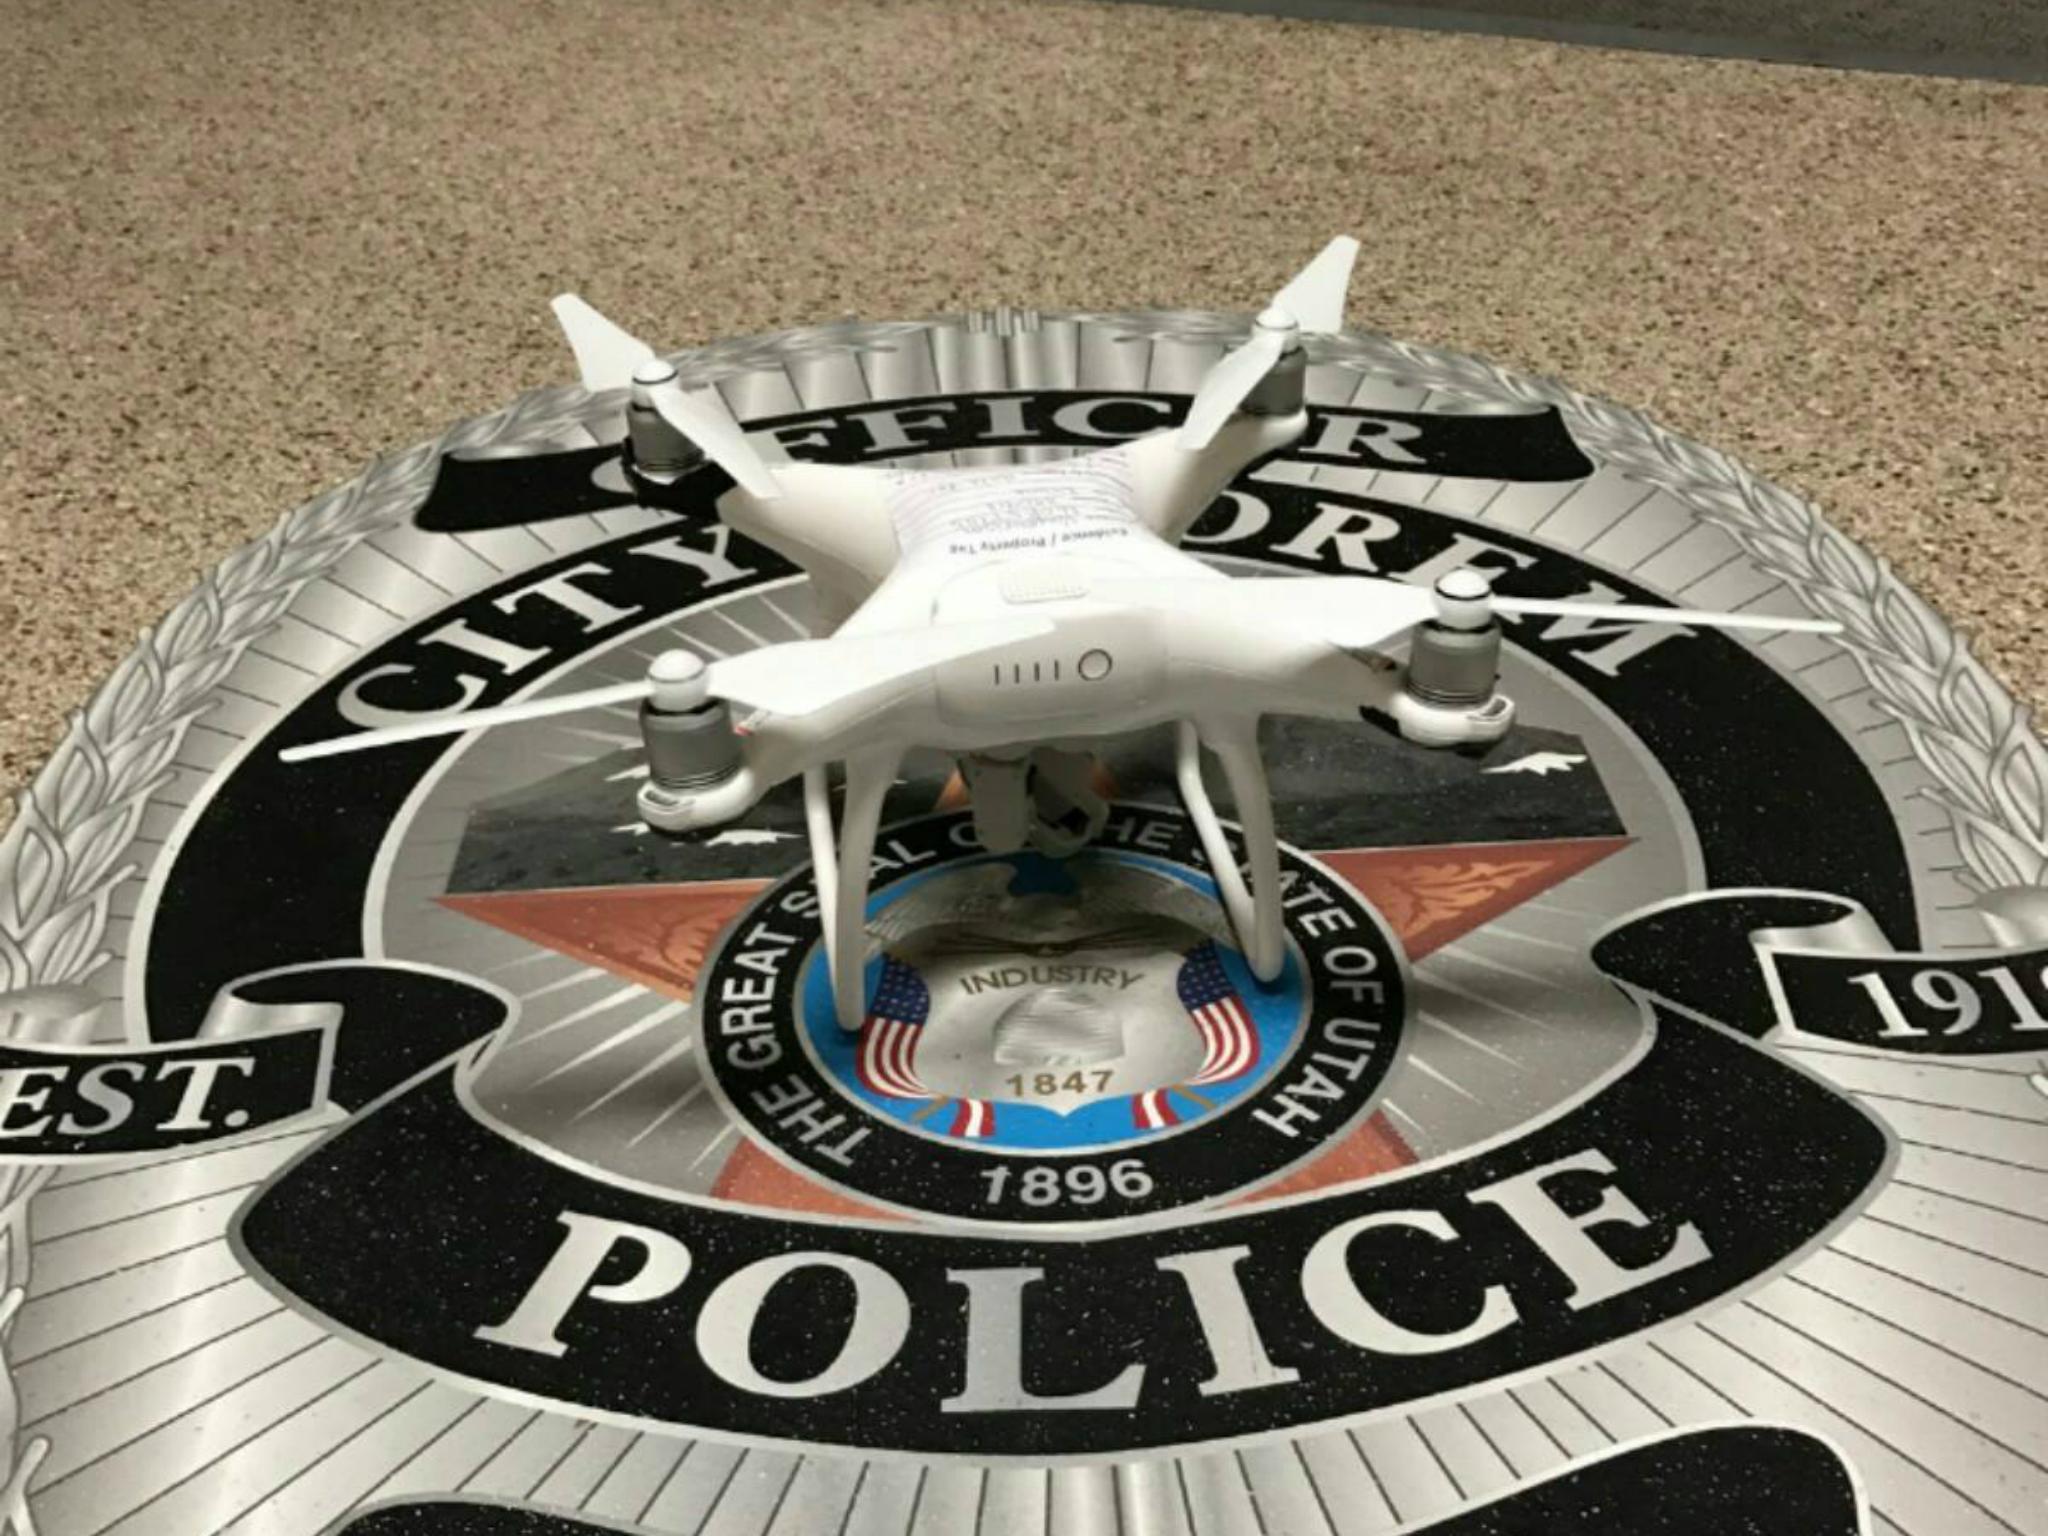 One victim claims to have chased the drone in his truck after spotting it outside his window